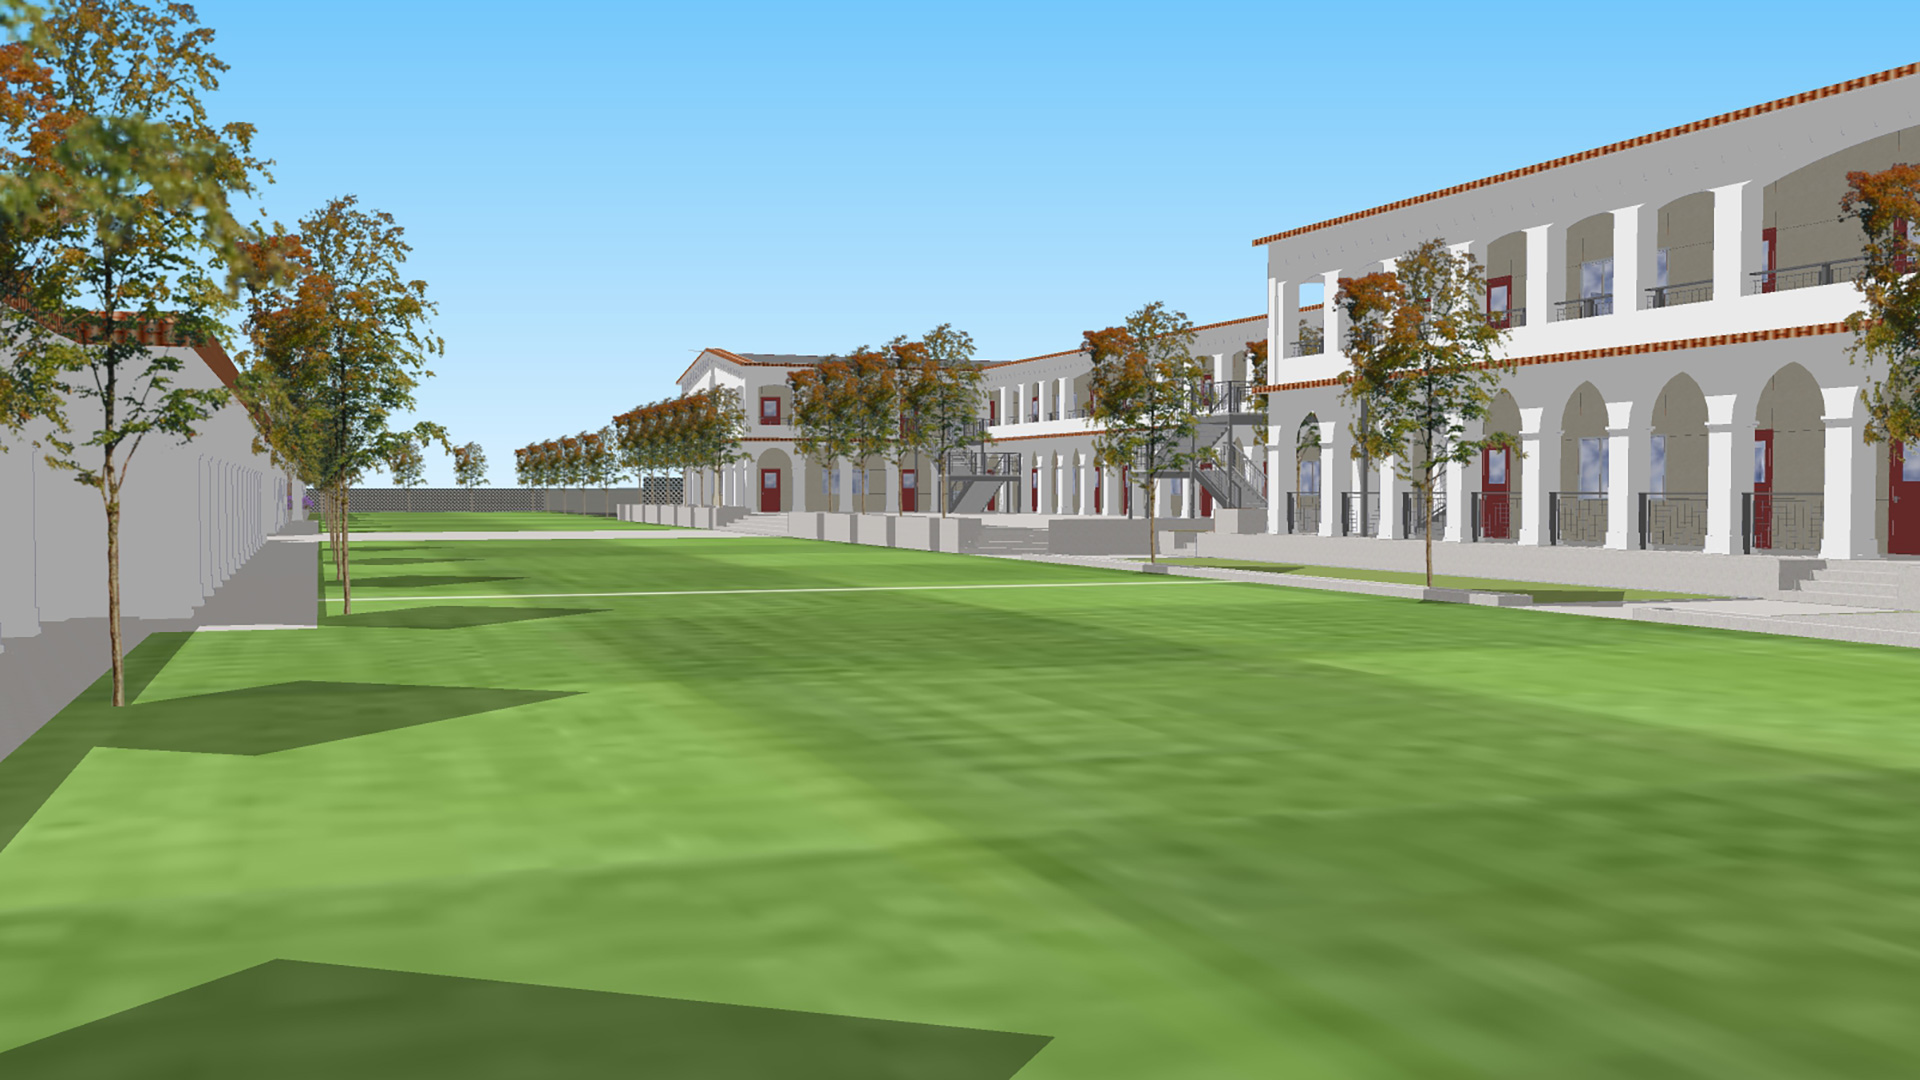 Campus rendering from parade field, with trees lining the sides and two-story buildings behind.